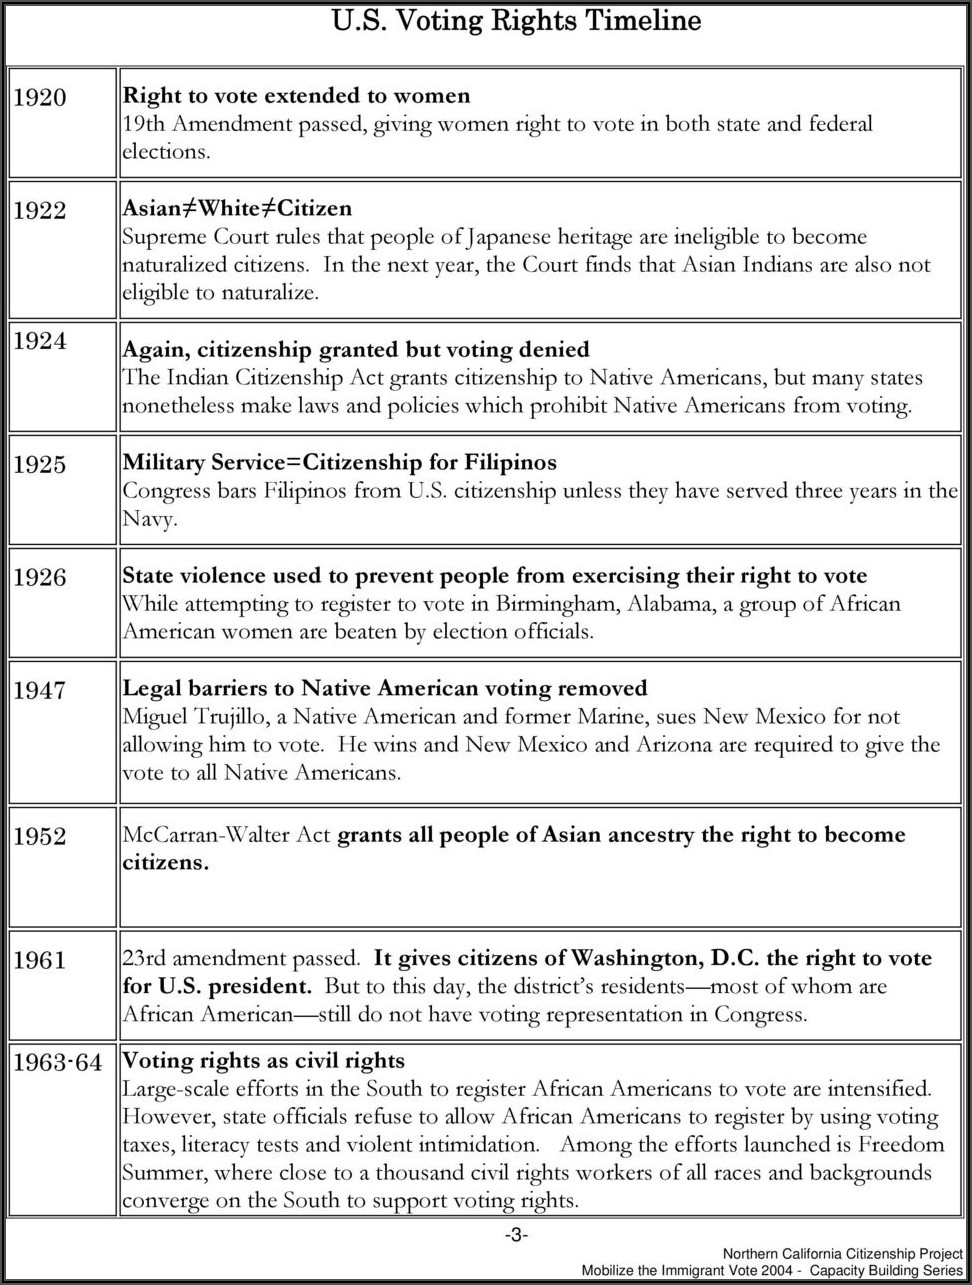 Voting Rights Timeline Worksheet Answers